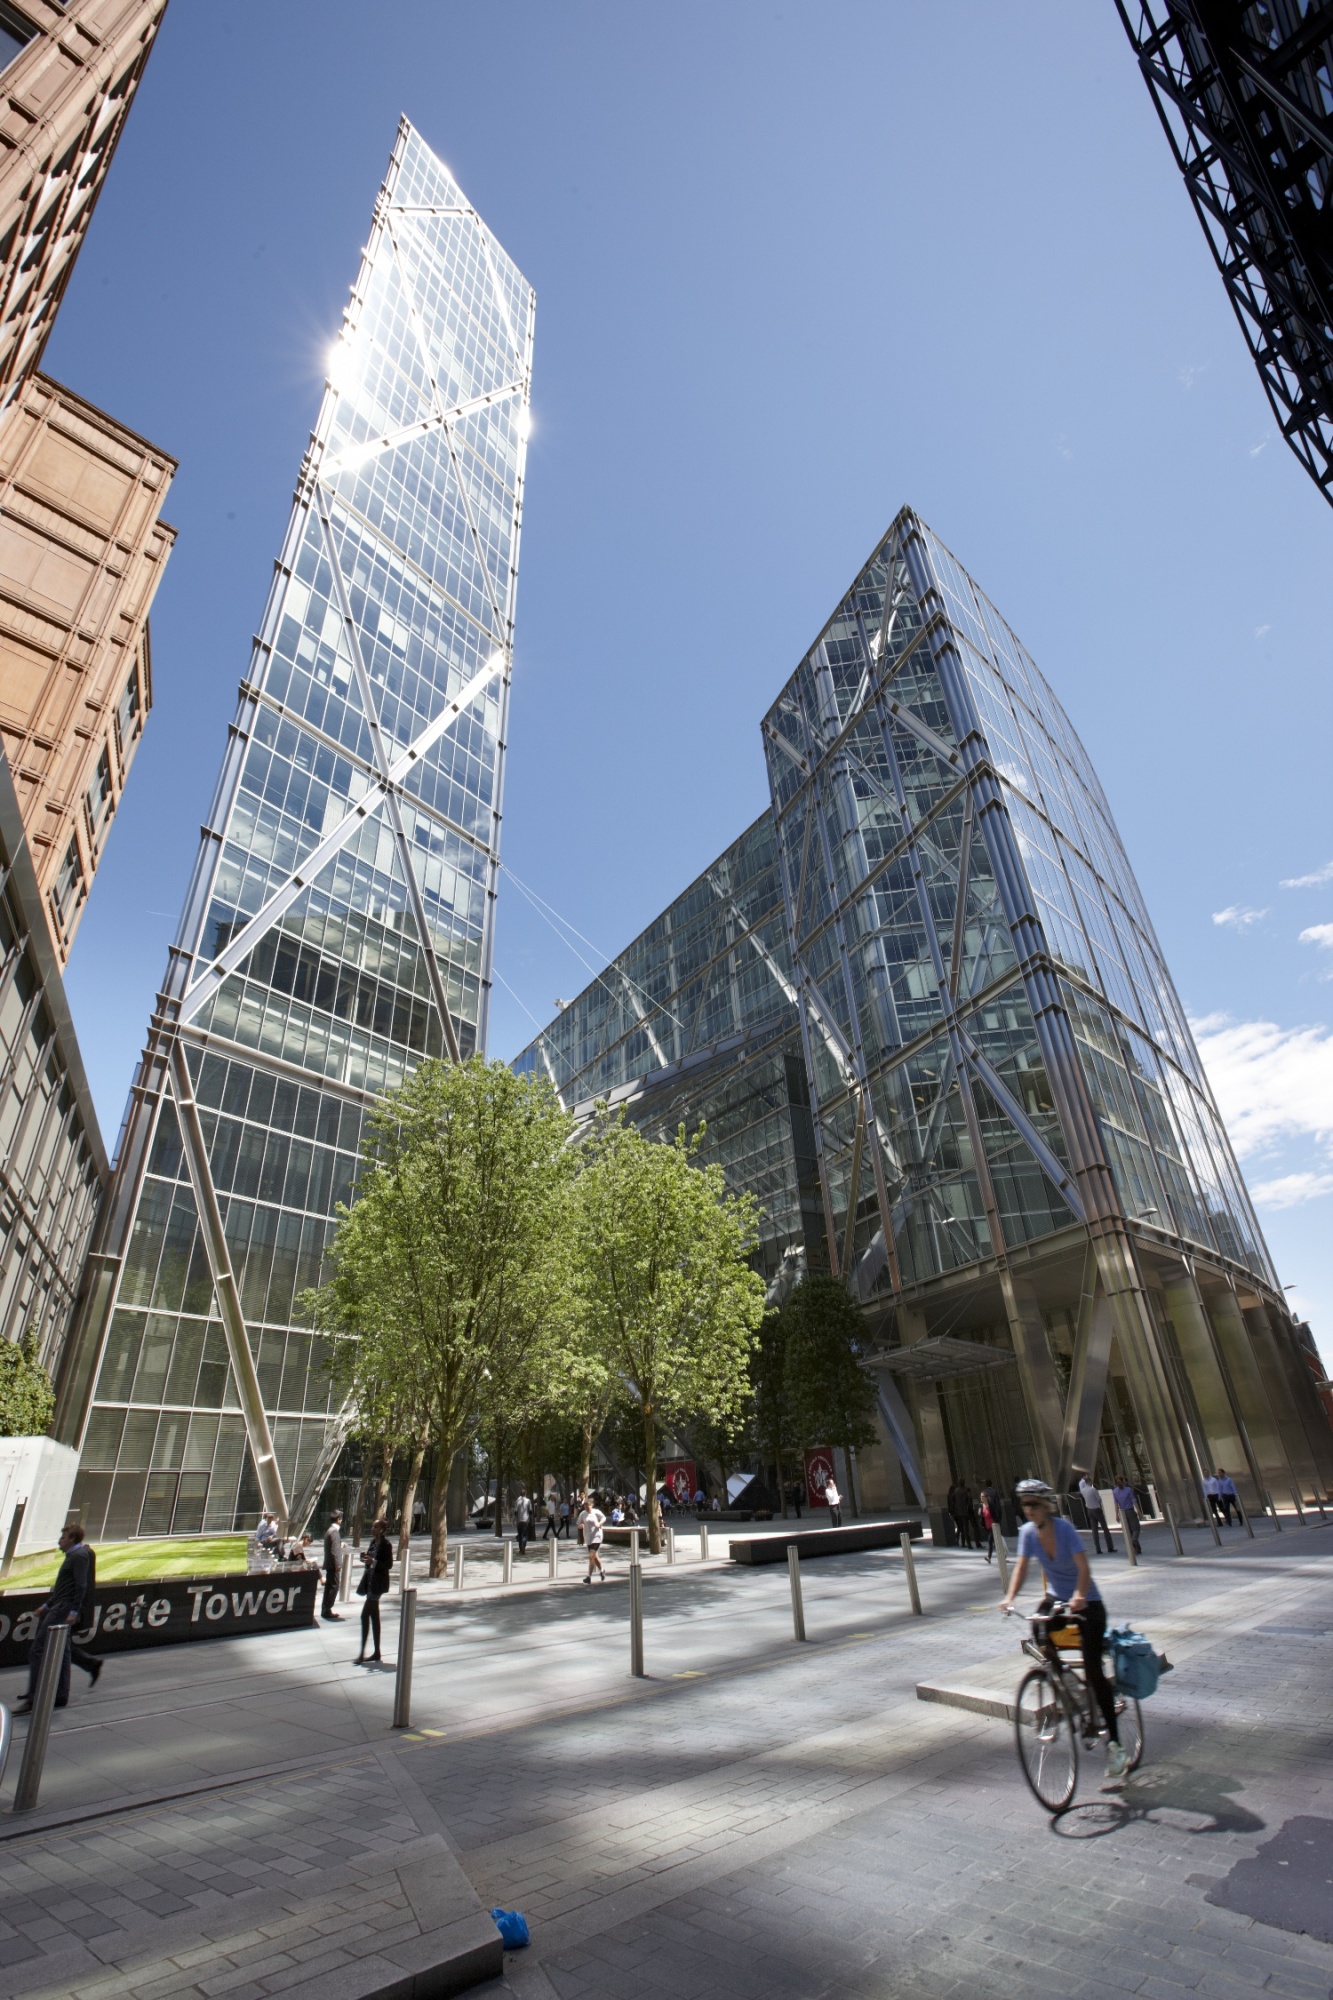 Broadgate is the largest pedestrianised neighbourhood in central London.